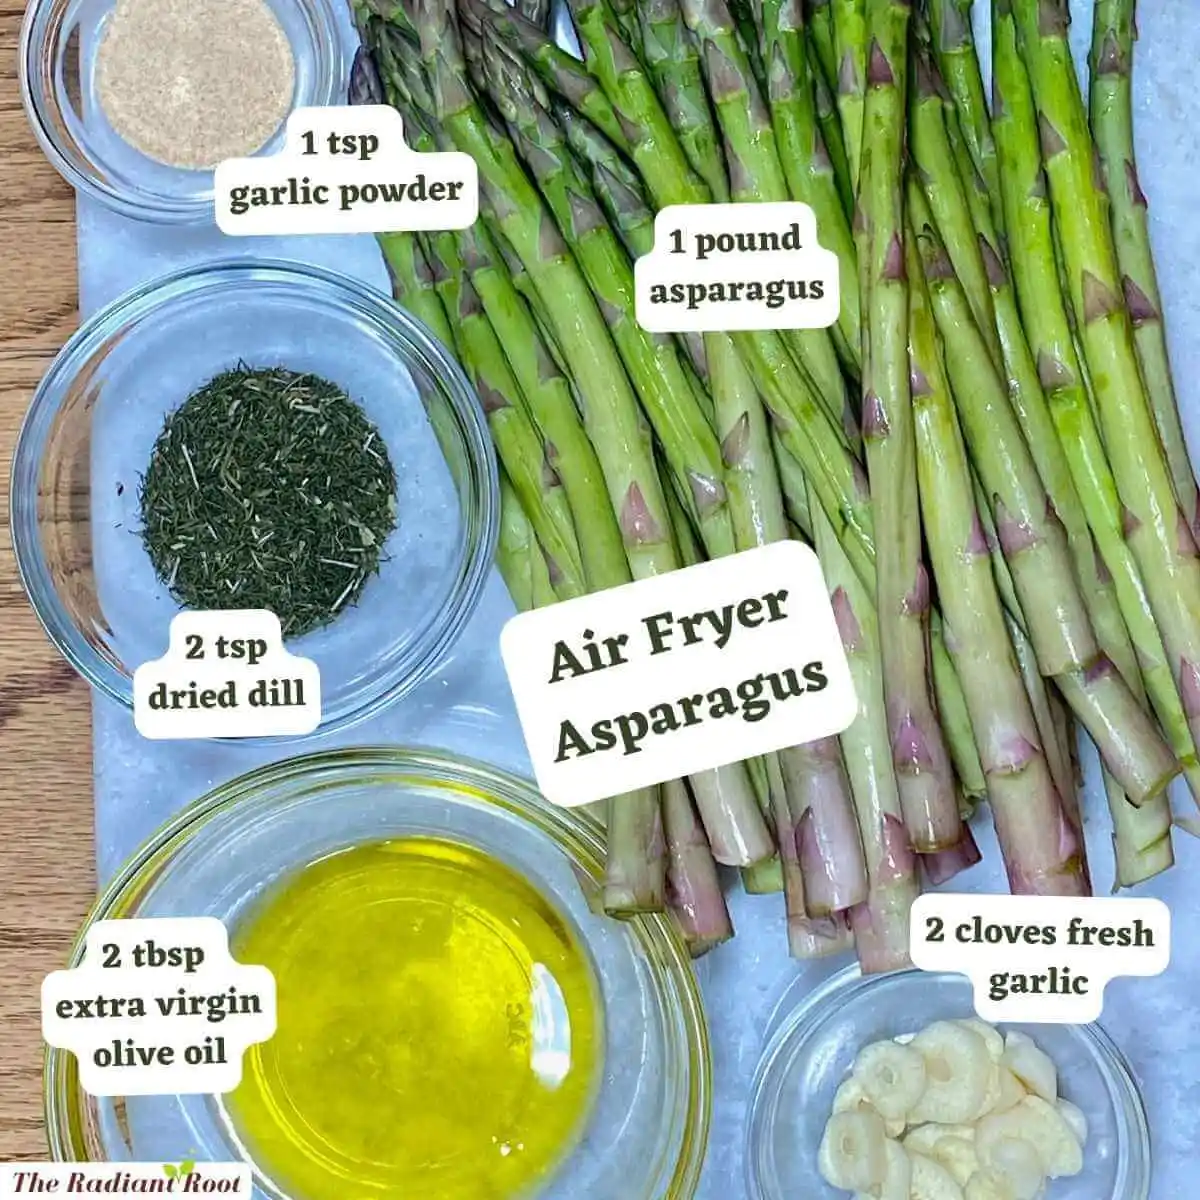 Ingredient Photo: A wooden table with a blue cutting board. On top of the cutting board are the ingredients for this recipe: asparagus and in small clear glass bowls are the other ingredients garlic powder, dried dill, extra virgin olive oil, and fresh garlic. The words read “Air Fryer Asparagus.” Then next to each ingredient it reads what it is “1 tsp garlic powder,” “1 pound asparagus,” “2 tsp dried dill,” 2 tbsp extra virgin olive oil,” and “2 cloves fresh garlic.” | fried asparagus recipe | The Radiant Root